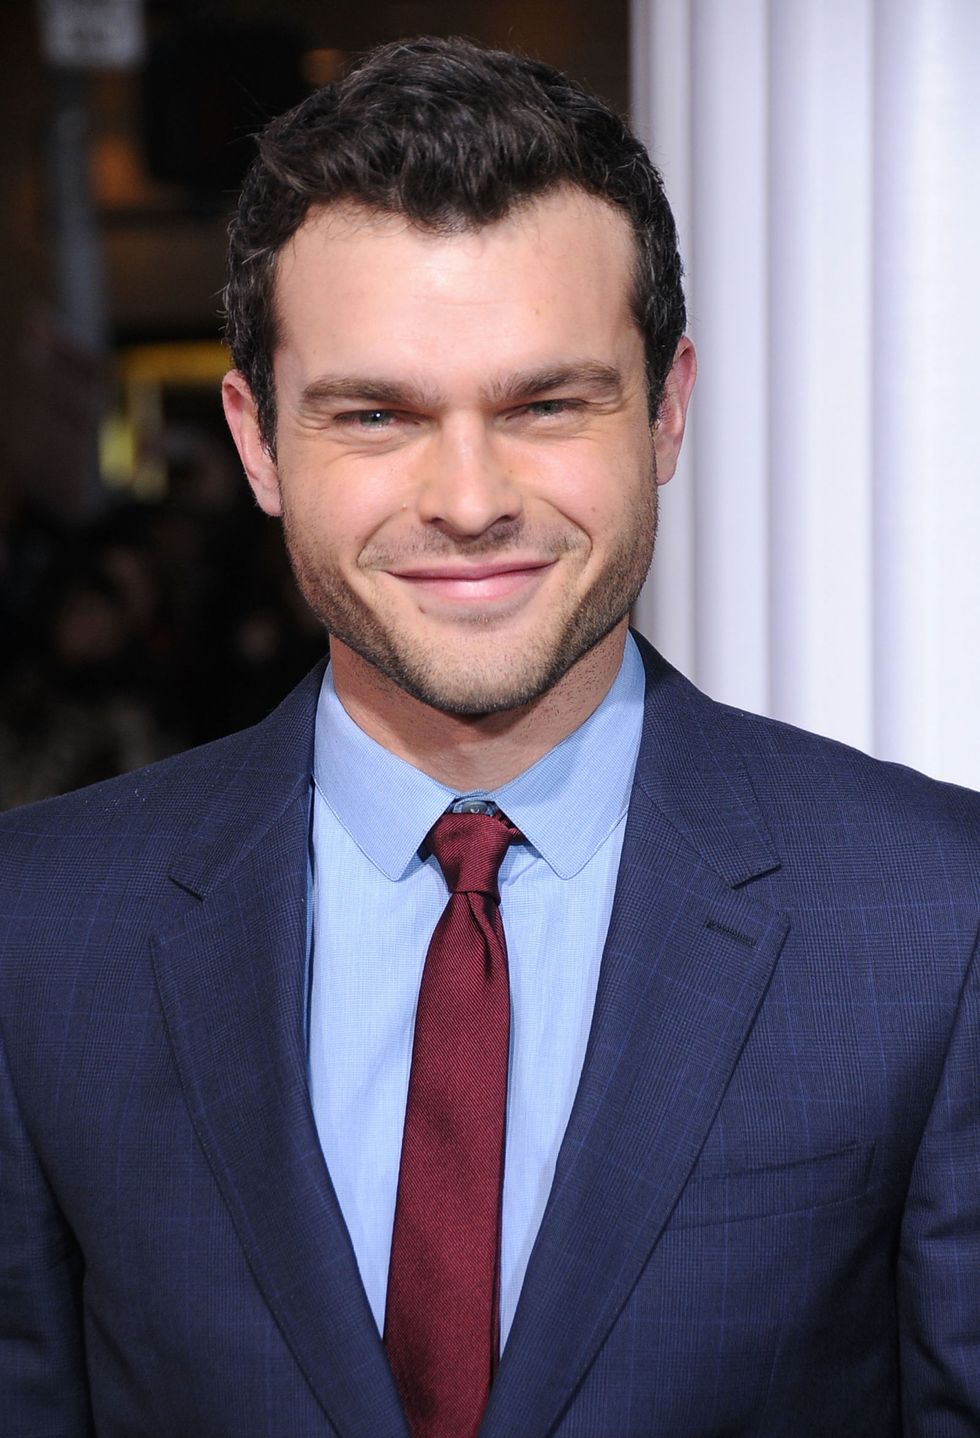 WESTWOOD, CA - FEBRUARY 01:  Actor Alden Ehrenreich attends the Premiere of Universal Pictures' 'Hail, Caesar!' at the Regency Village Theatre on February 1, 2015 in Westwood, California.  (Photo by Barry King/Getty Images)